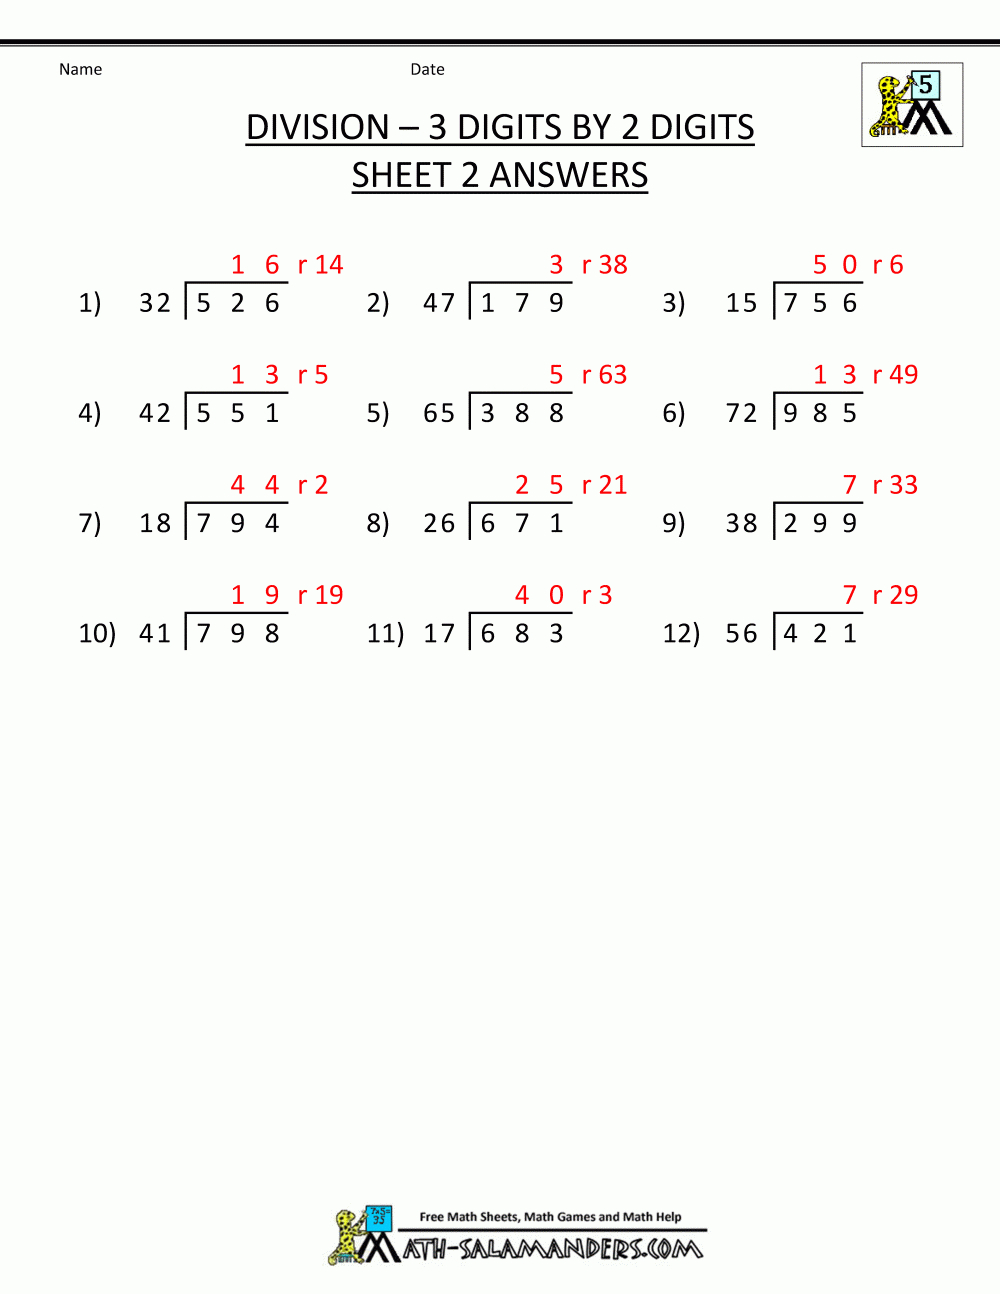 Long Division Worksheets For 5Th Grade As Well As Dividing By 2 Worksheets